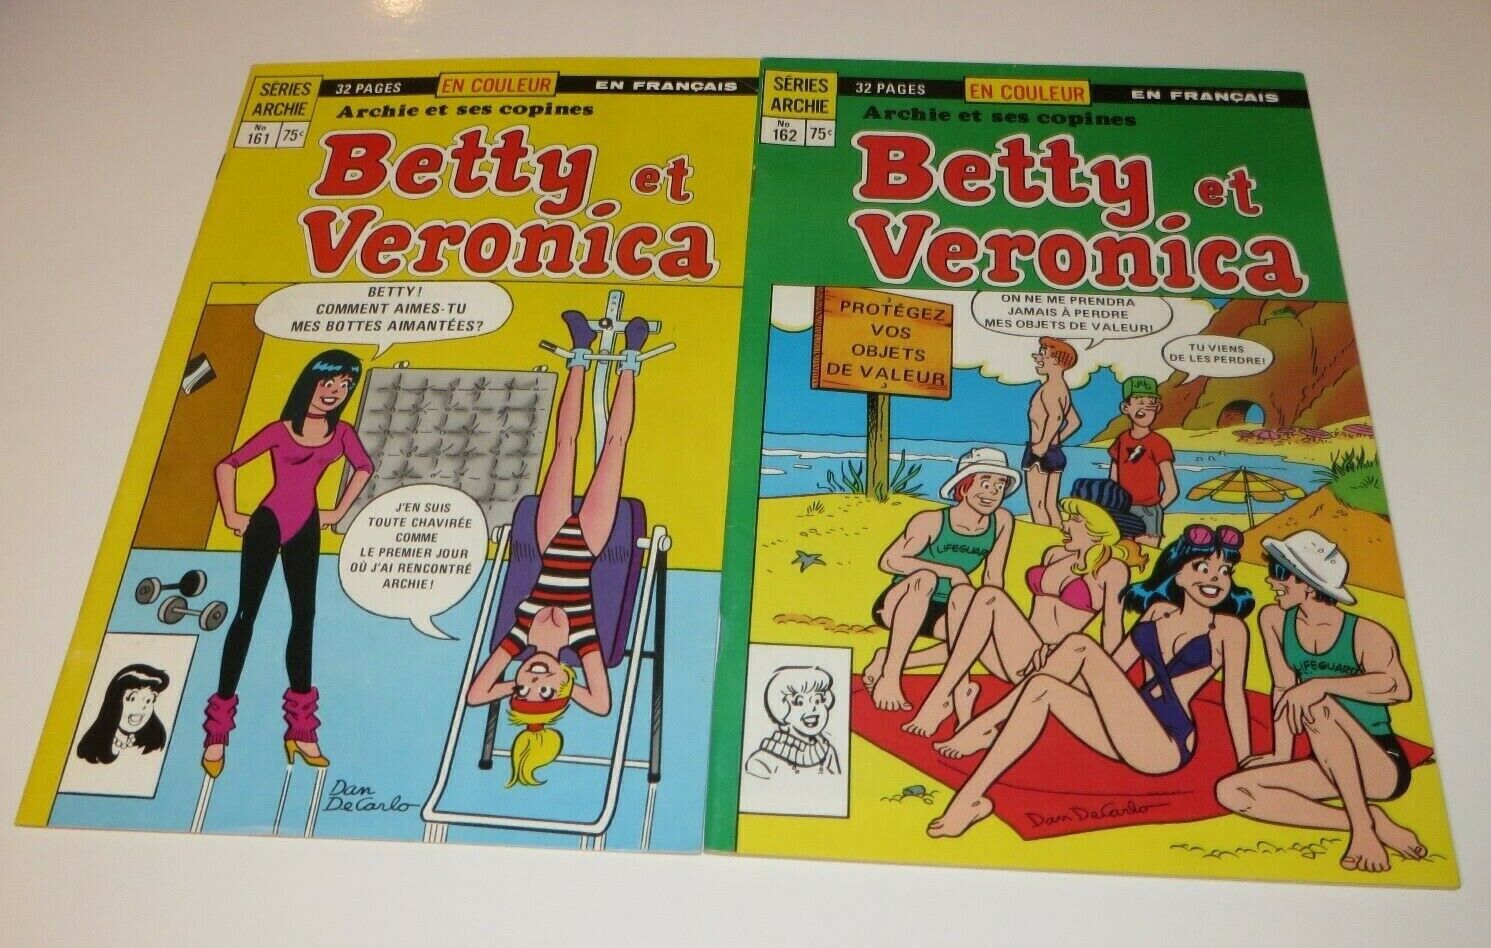 ARCHIE BETTY ET VERONICA #161-162  HERITAGE FRENCH COMIC LOT OF 2 1985 FREE**